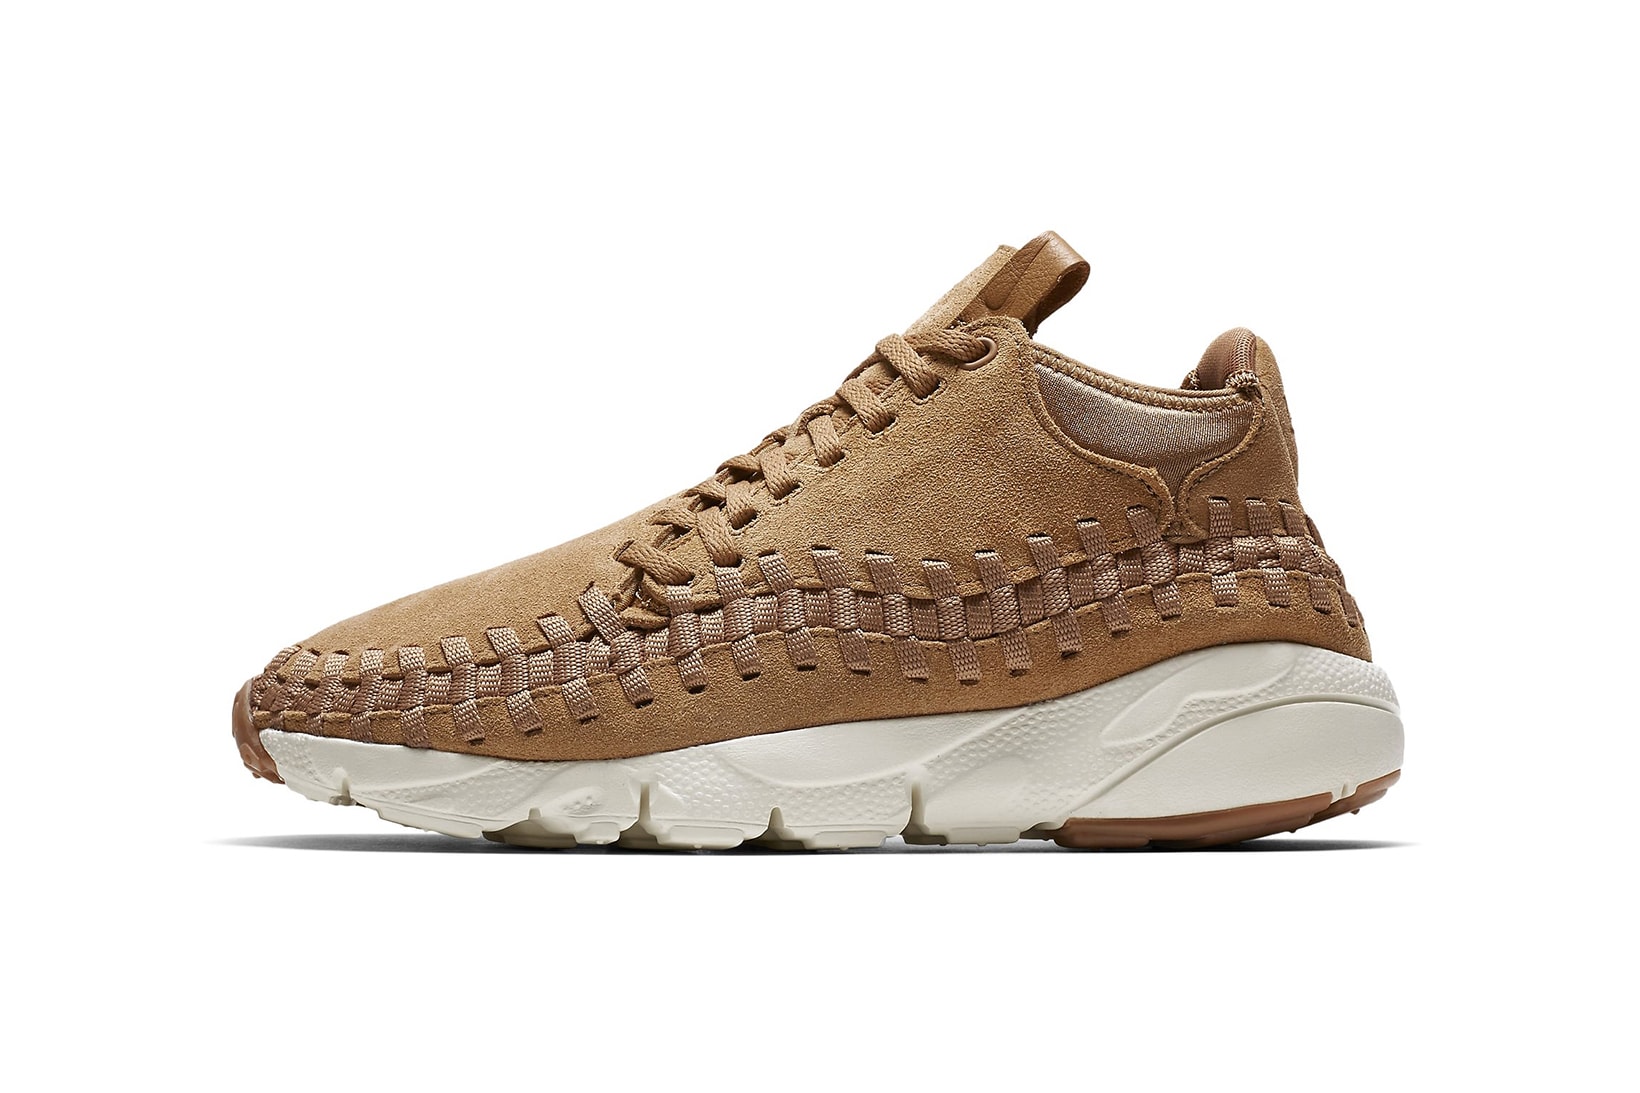 Nike Air Max 90 BW Huarache Footscape Woven Chukka Flax Wheat 2017 October 14 Release Date Info Sneakers Shoes Footwear